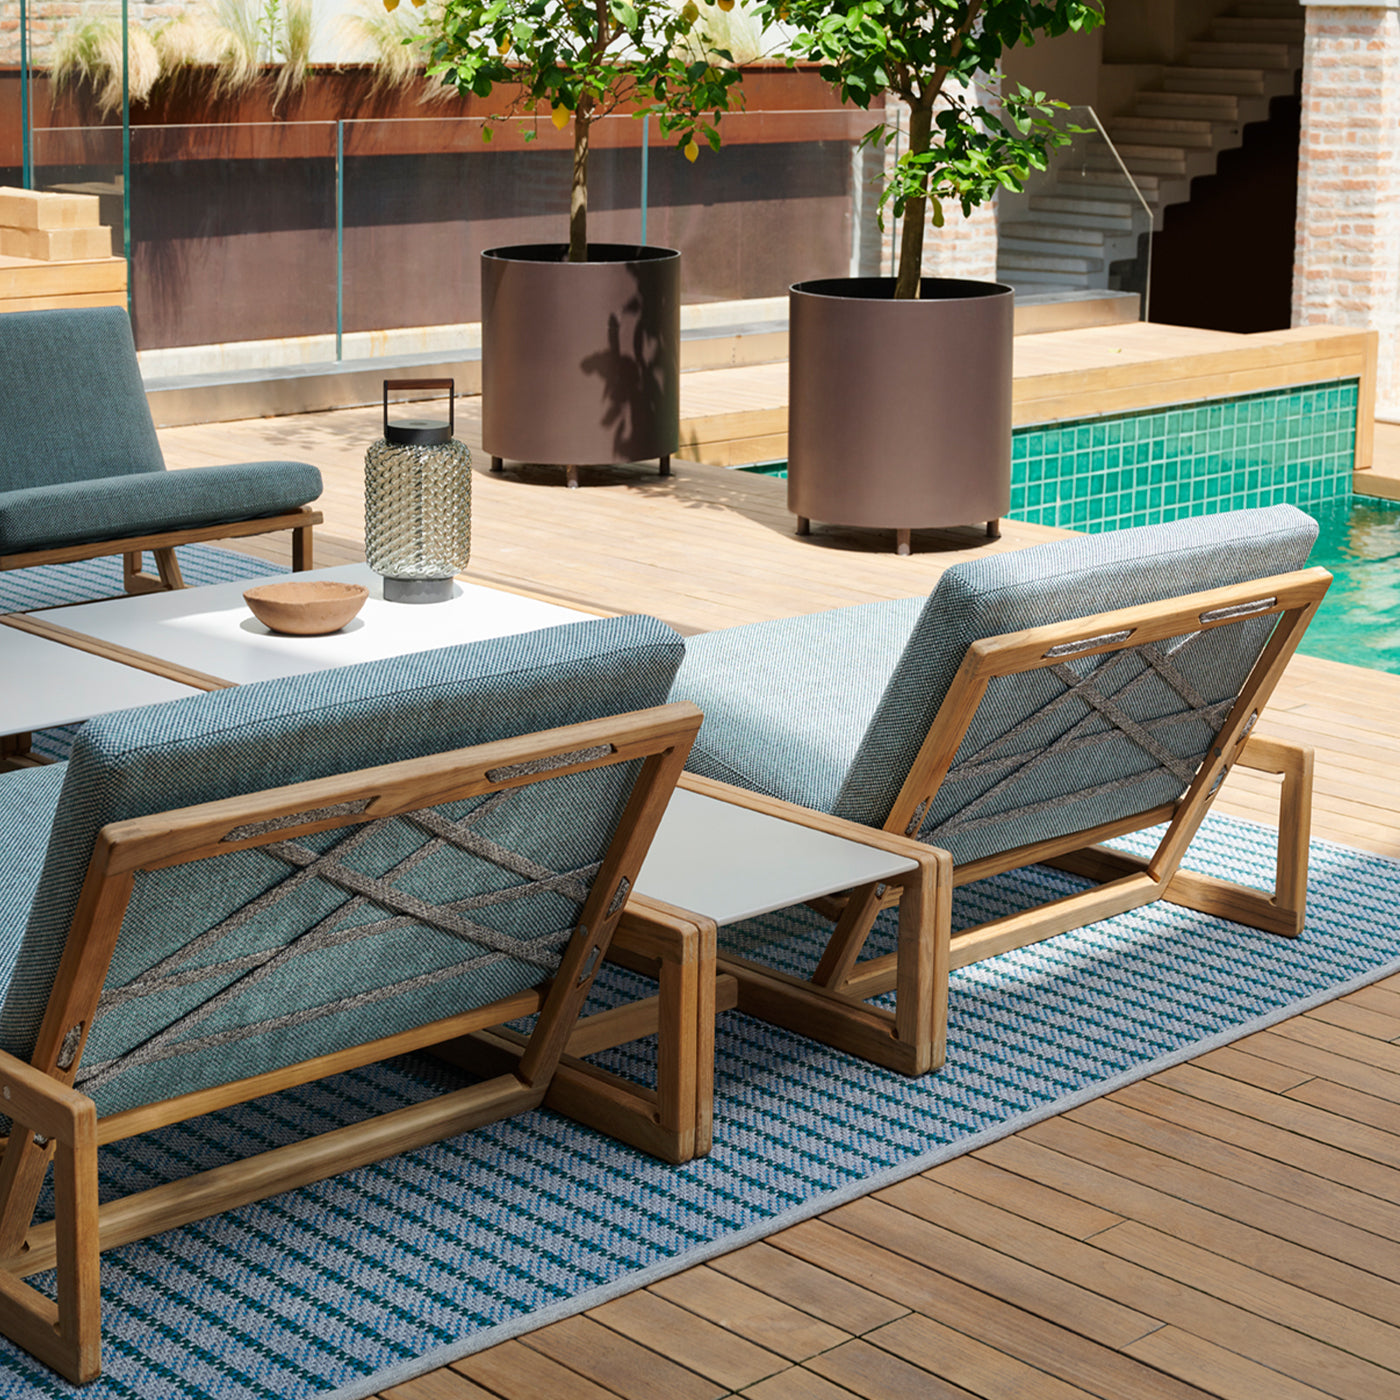 Ficupala by Cassina - Outdoor - Alternative view 1